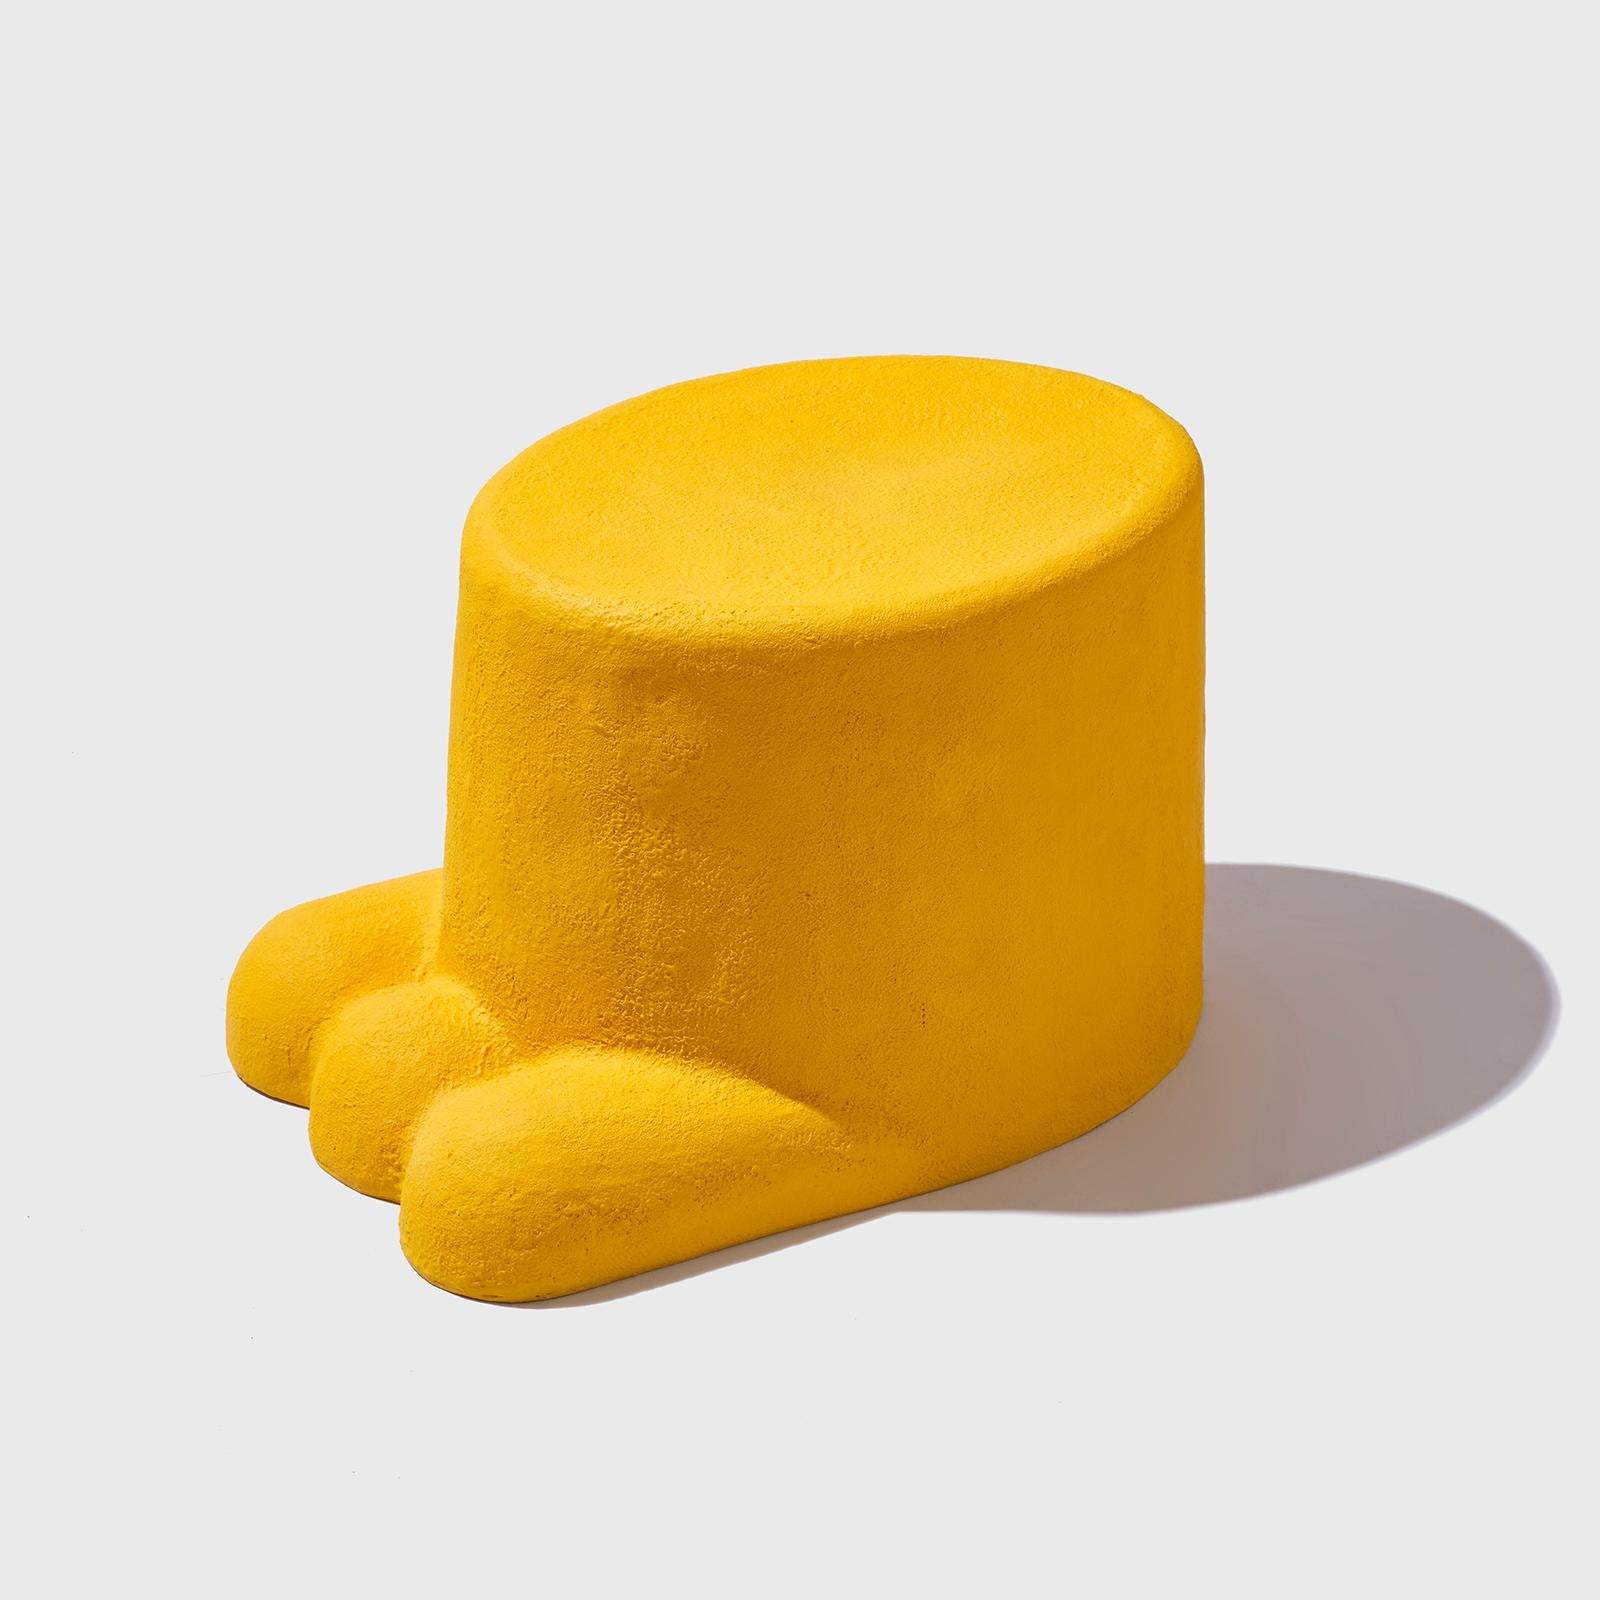 Mini Paw stool by Hakmin Lee
Materials: FRP
Dimensions: 41 x 26 x H 26 cm
4 kg

Available in FRP Yellow/ Blue/ Green/ Pink/ White/ Orange, please contact us.


Studio HAK is Seoul based studio led by designer Hakmin Lee, who has an ambition